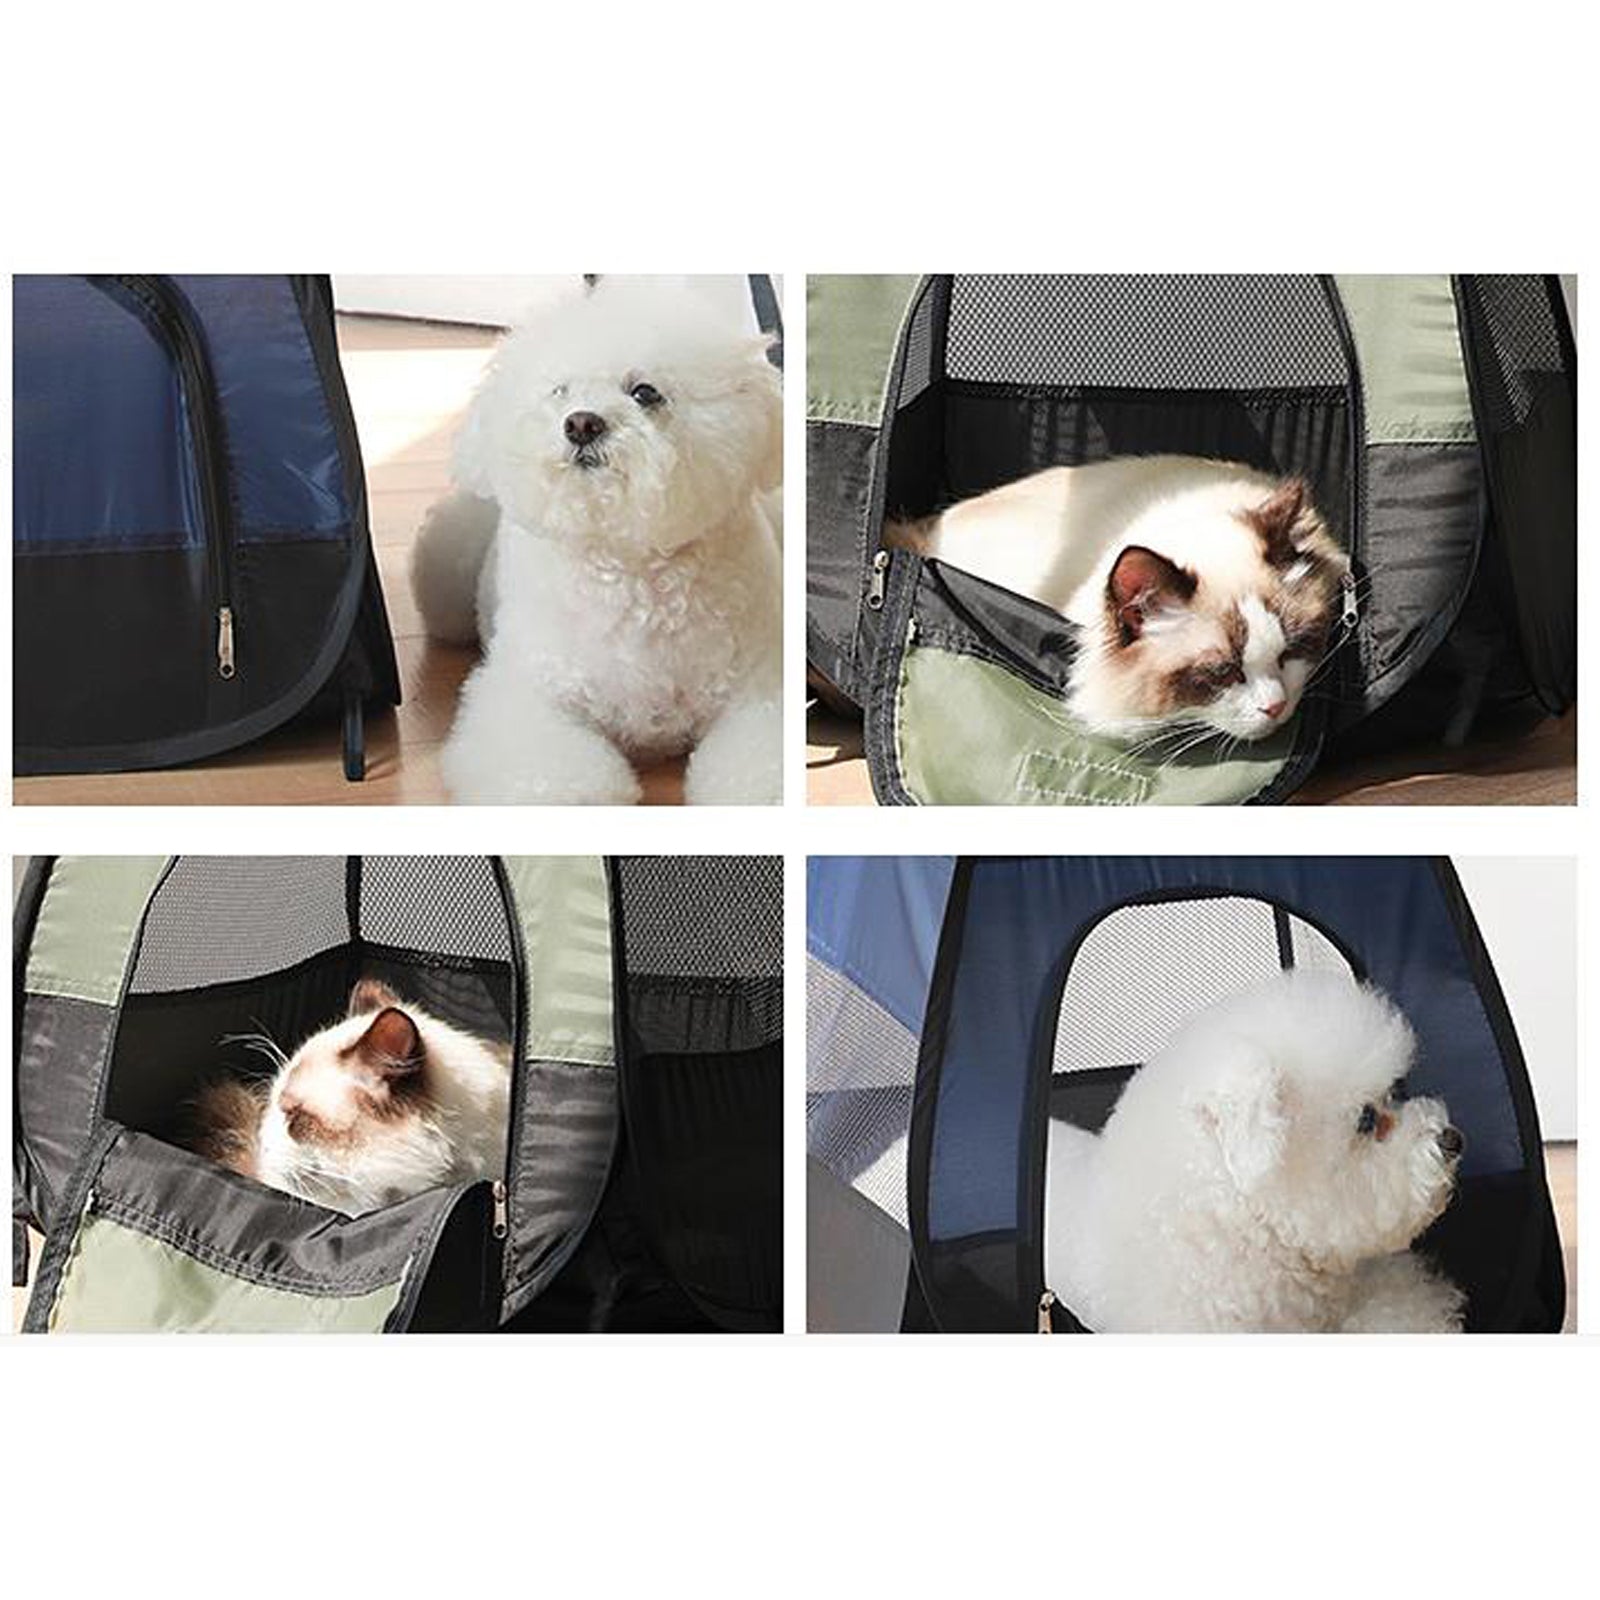 Sugeryy Yard Fence Pet Cage Removable Breathable Outdoor Folding Mesh Dog Tent